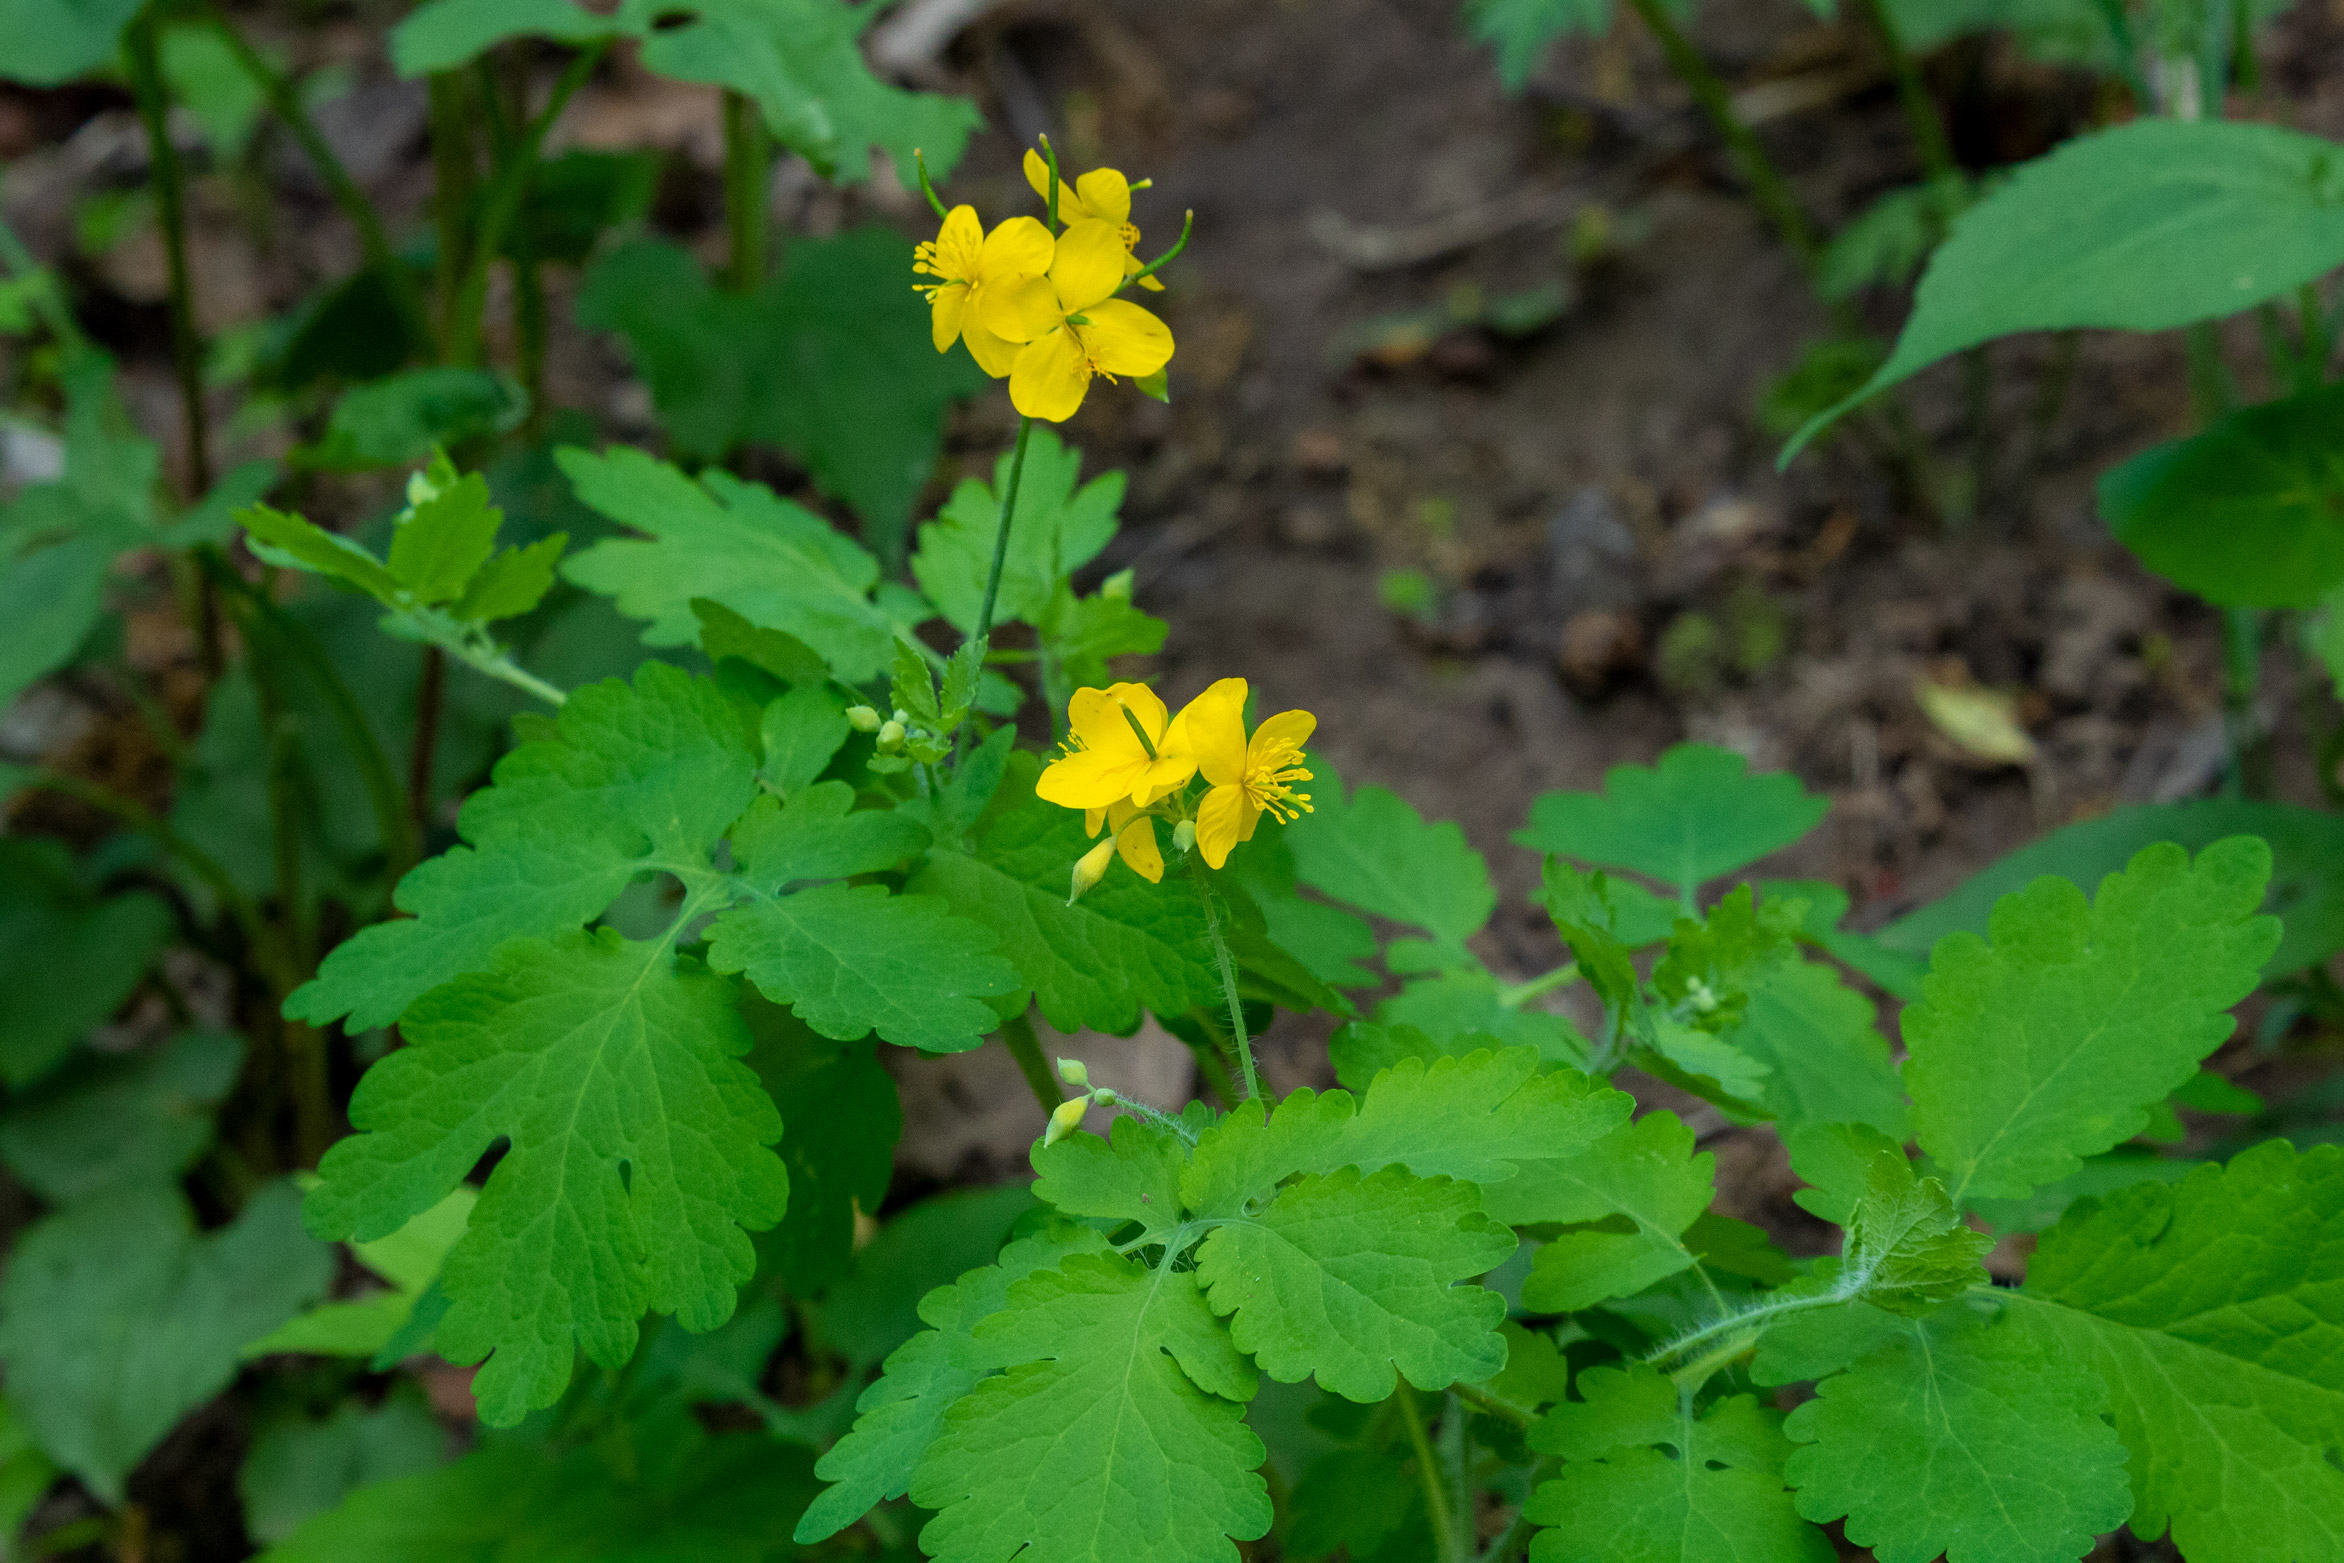 Small yellow flowers with wide green leaves